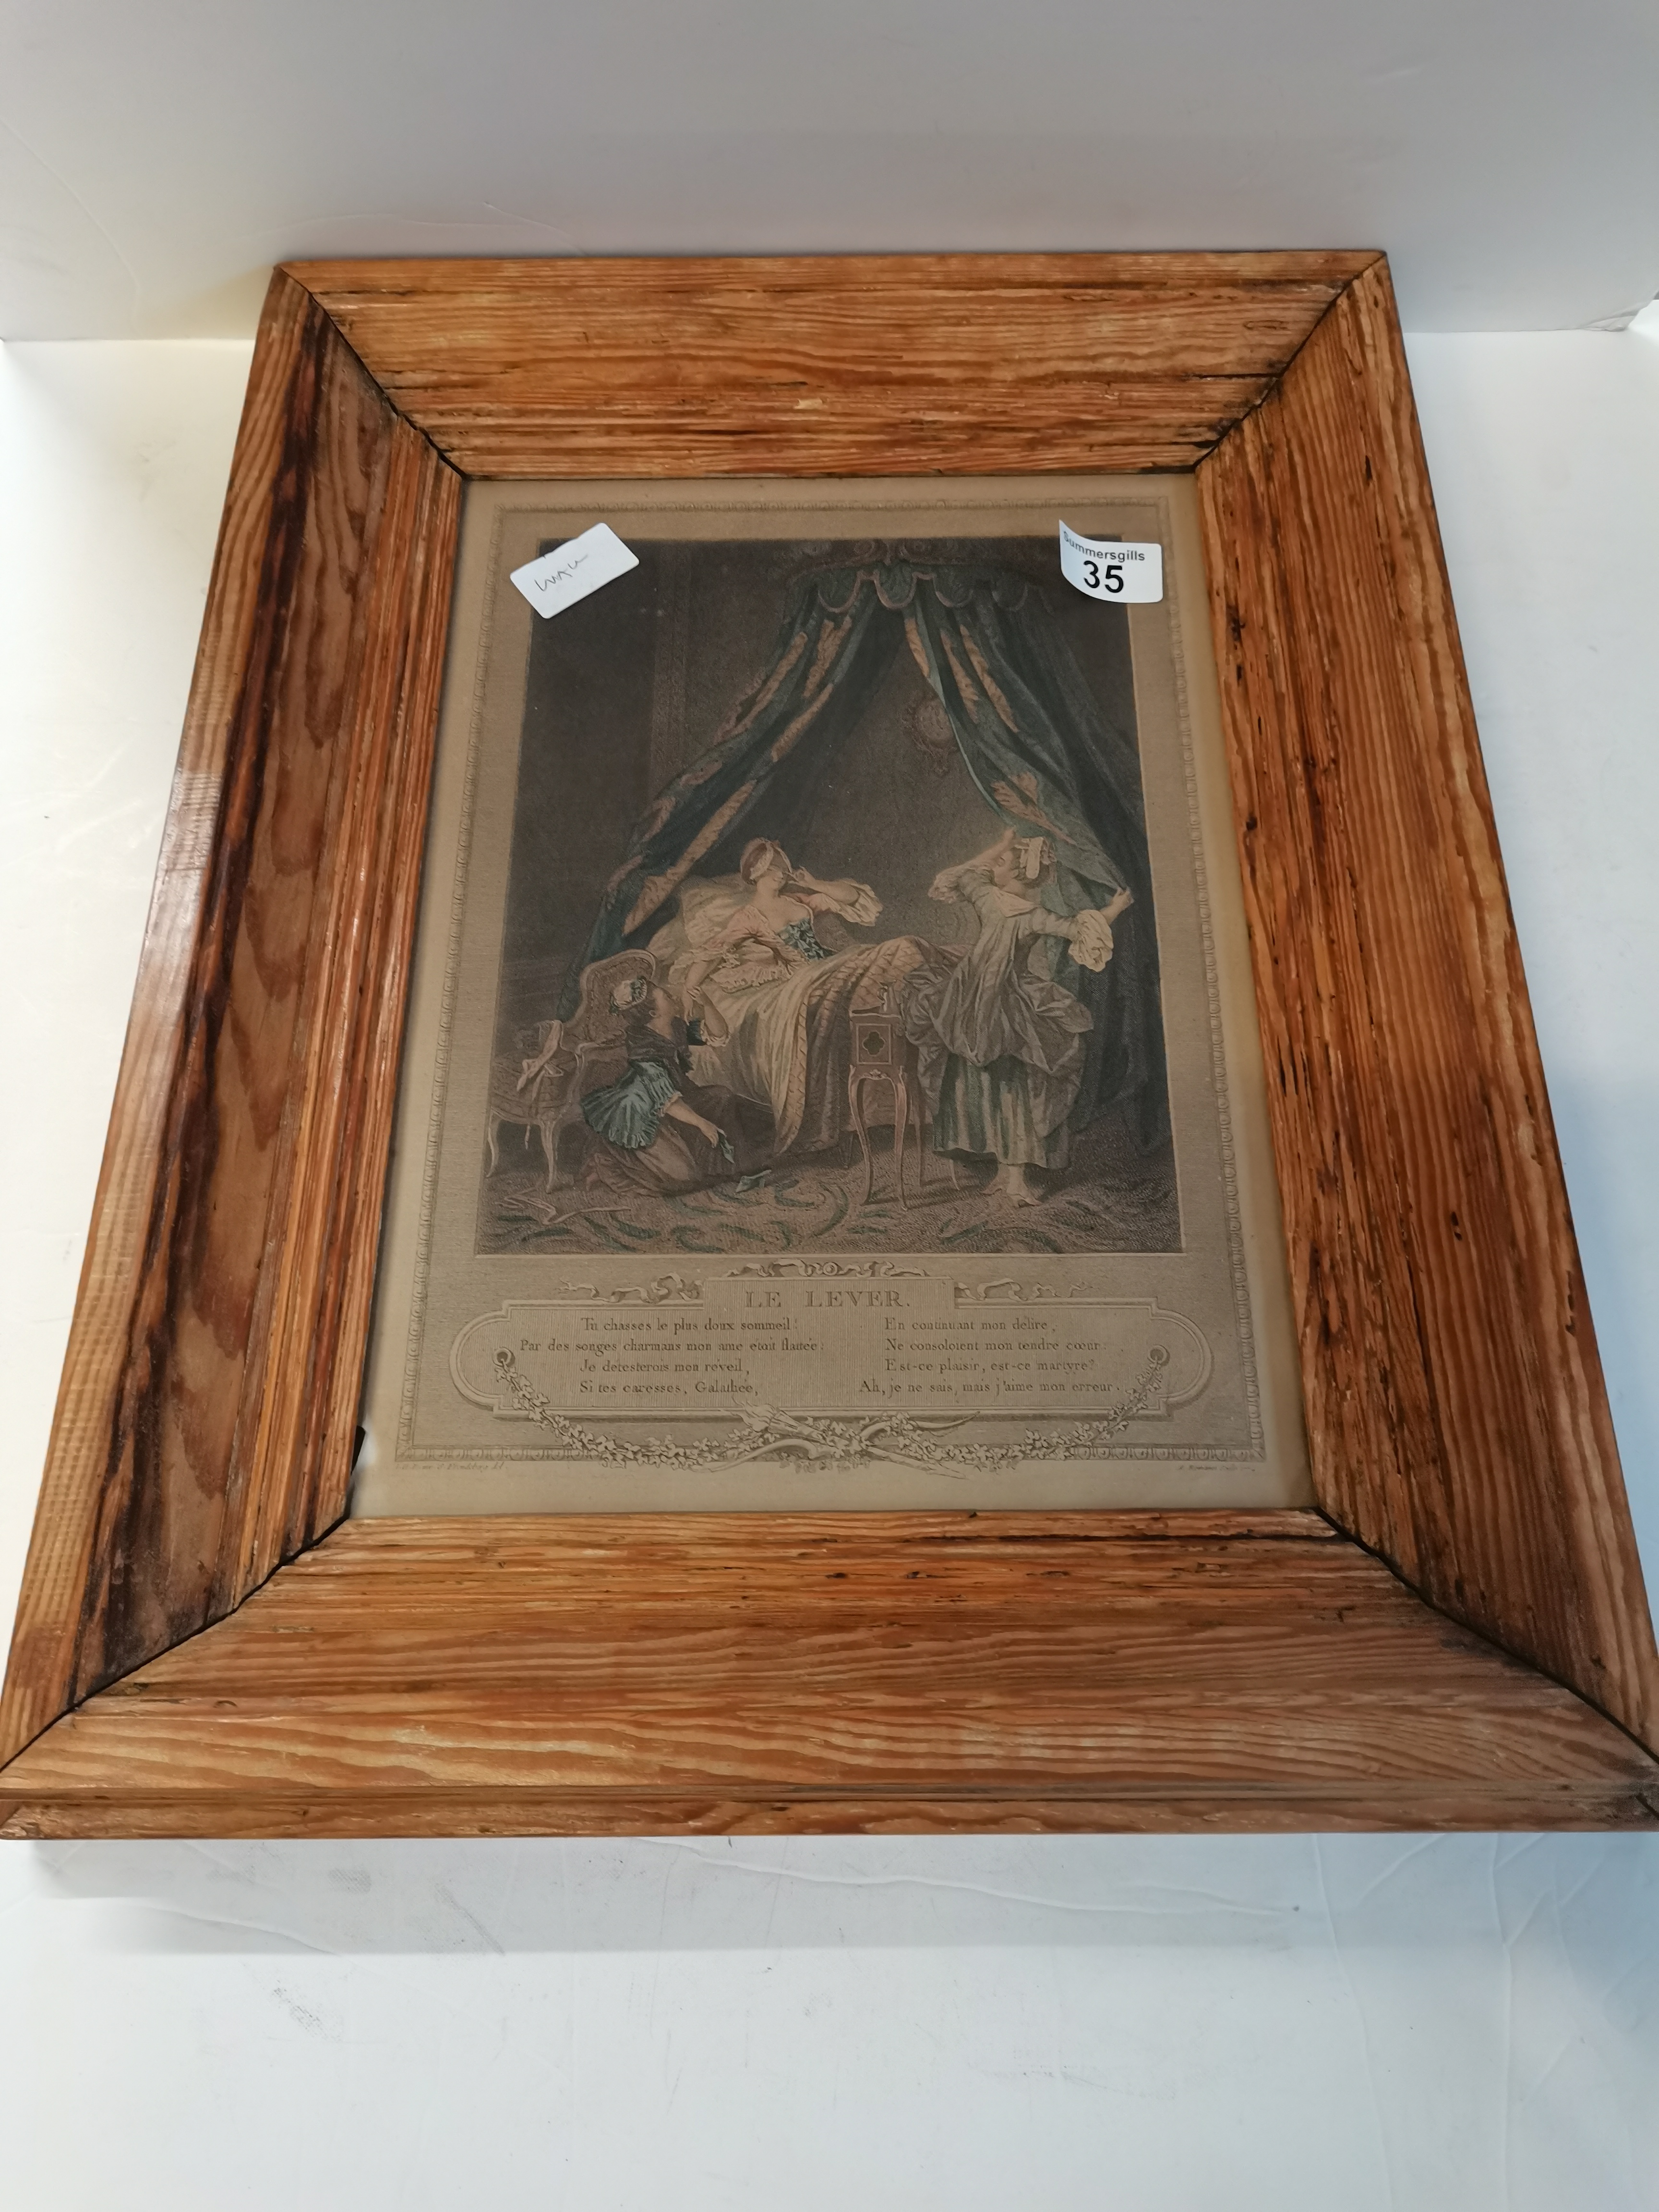 Picture in wooden frame "Le Lever" (Damage to glass bottom lefthand corner)